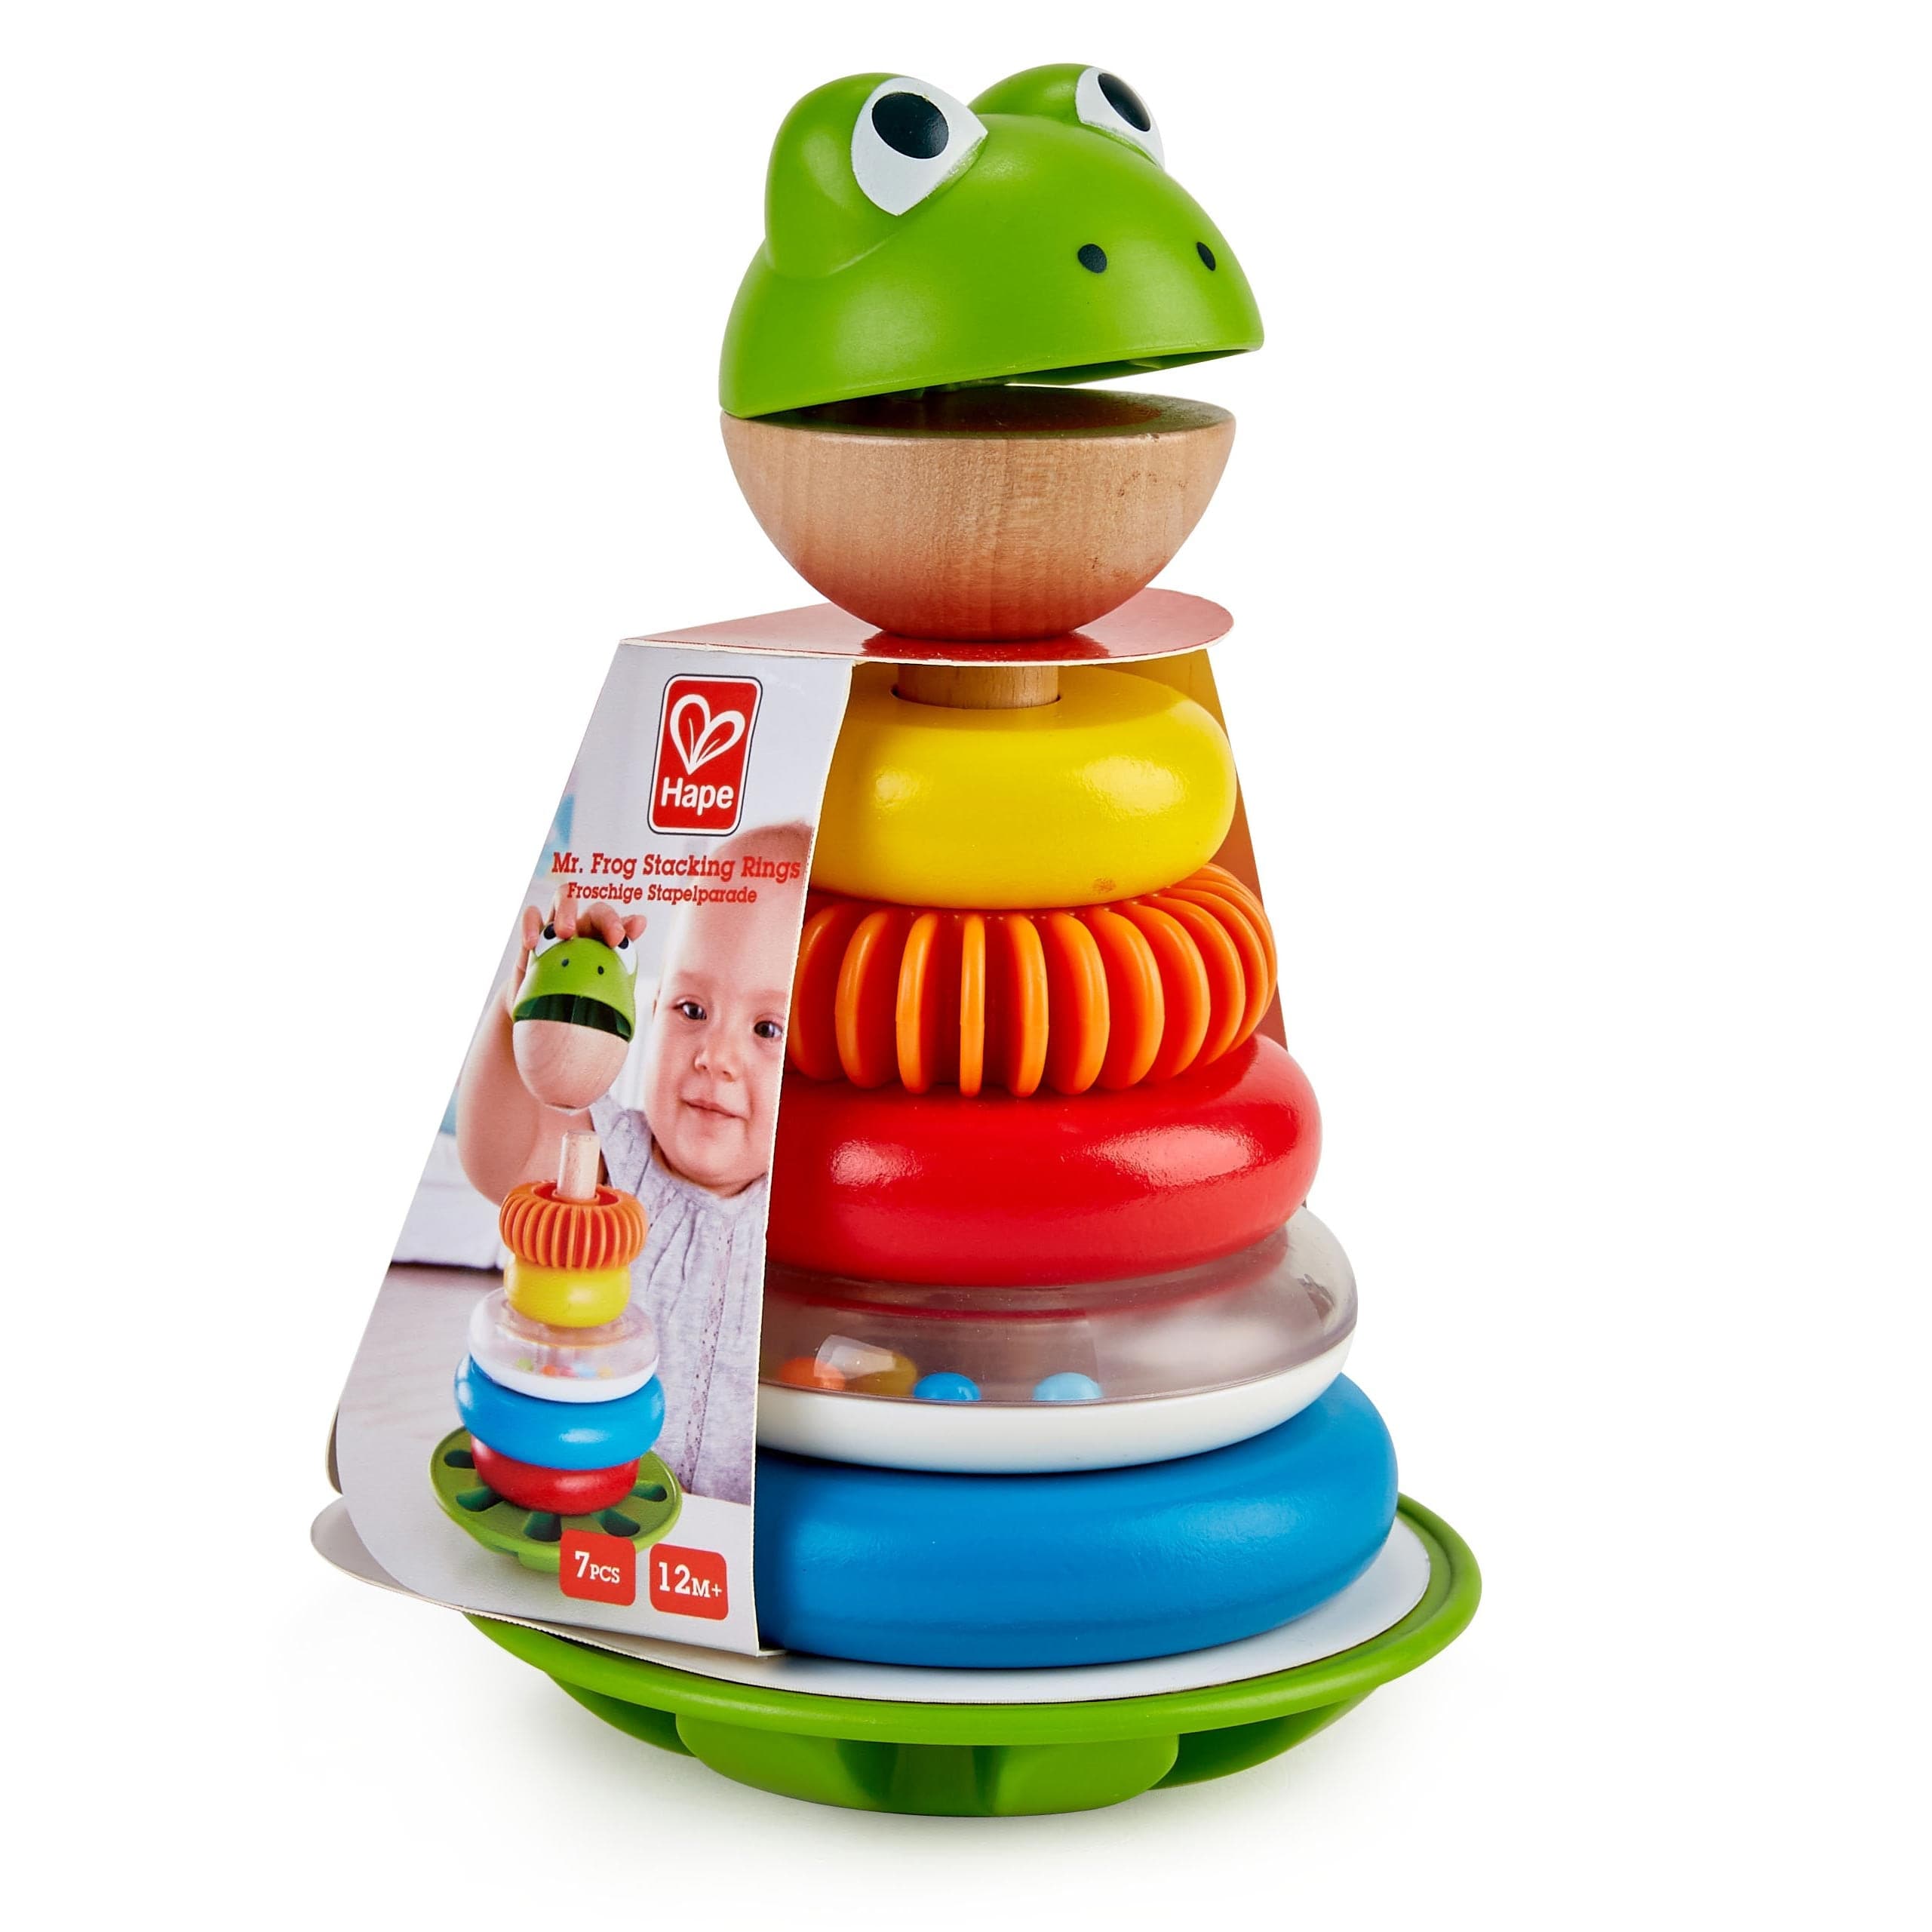 Hape-Mr. Frog Stacking Rings-E0457-Legacy Toys